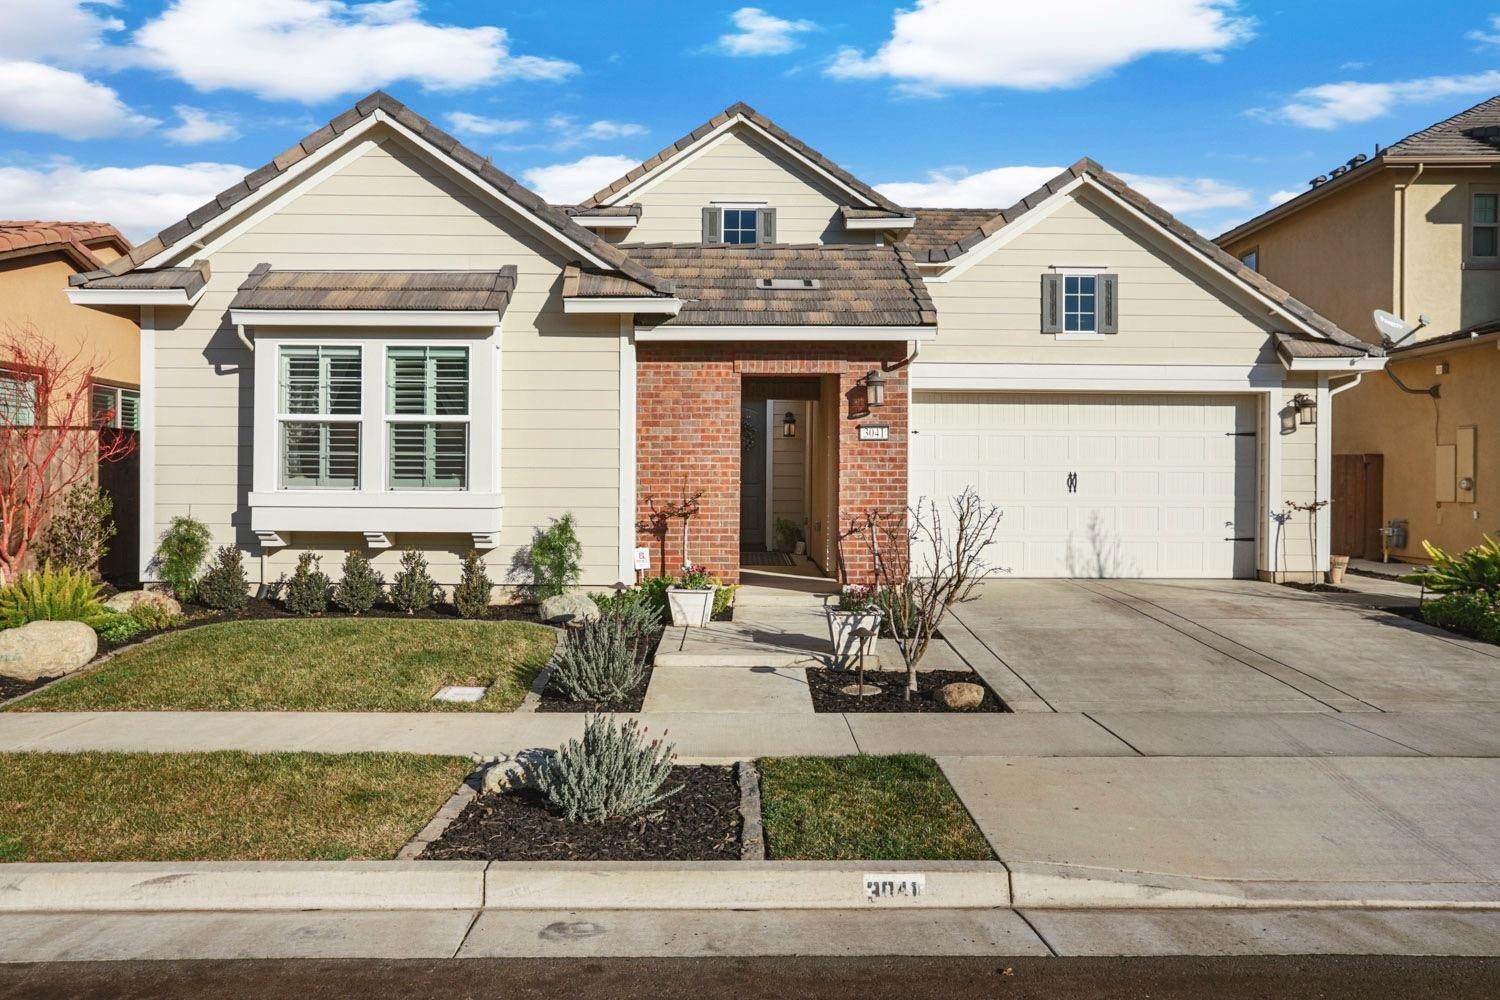 Single Family Homes for Active at 3041 Artistry Street Lodi, California 95242 United States